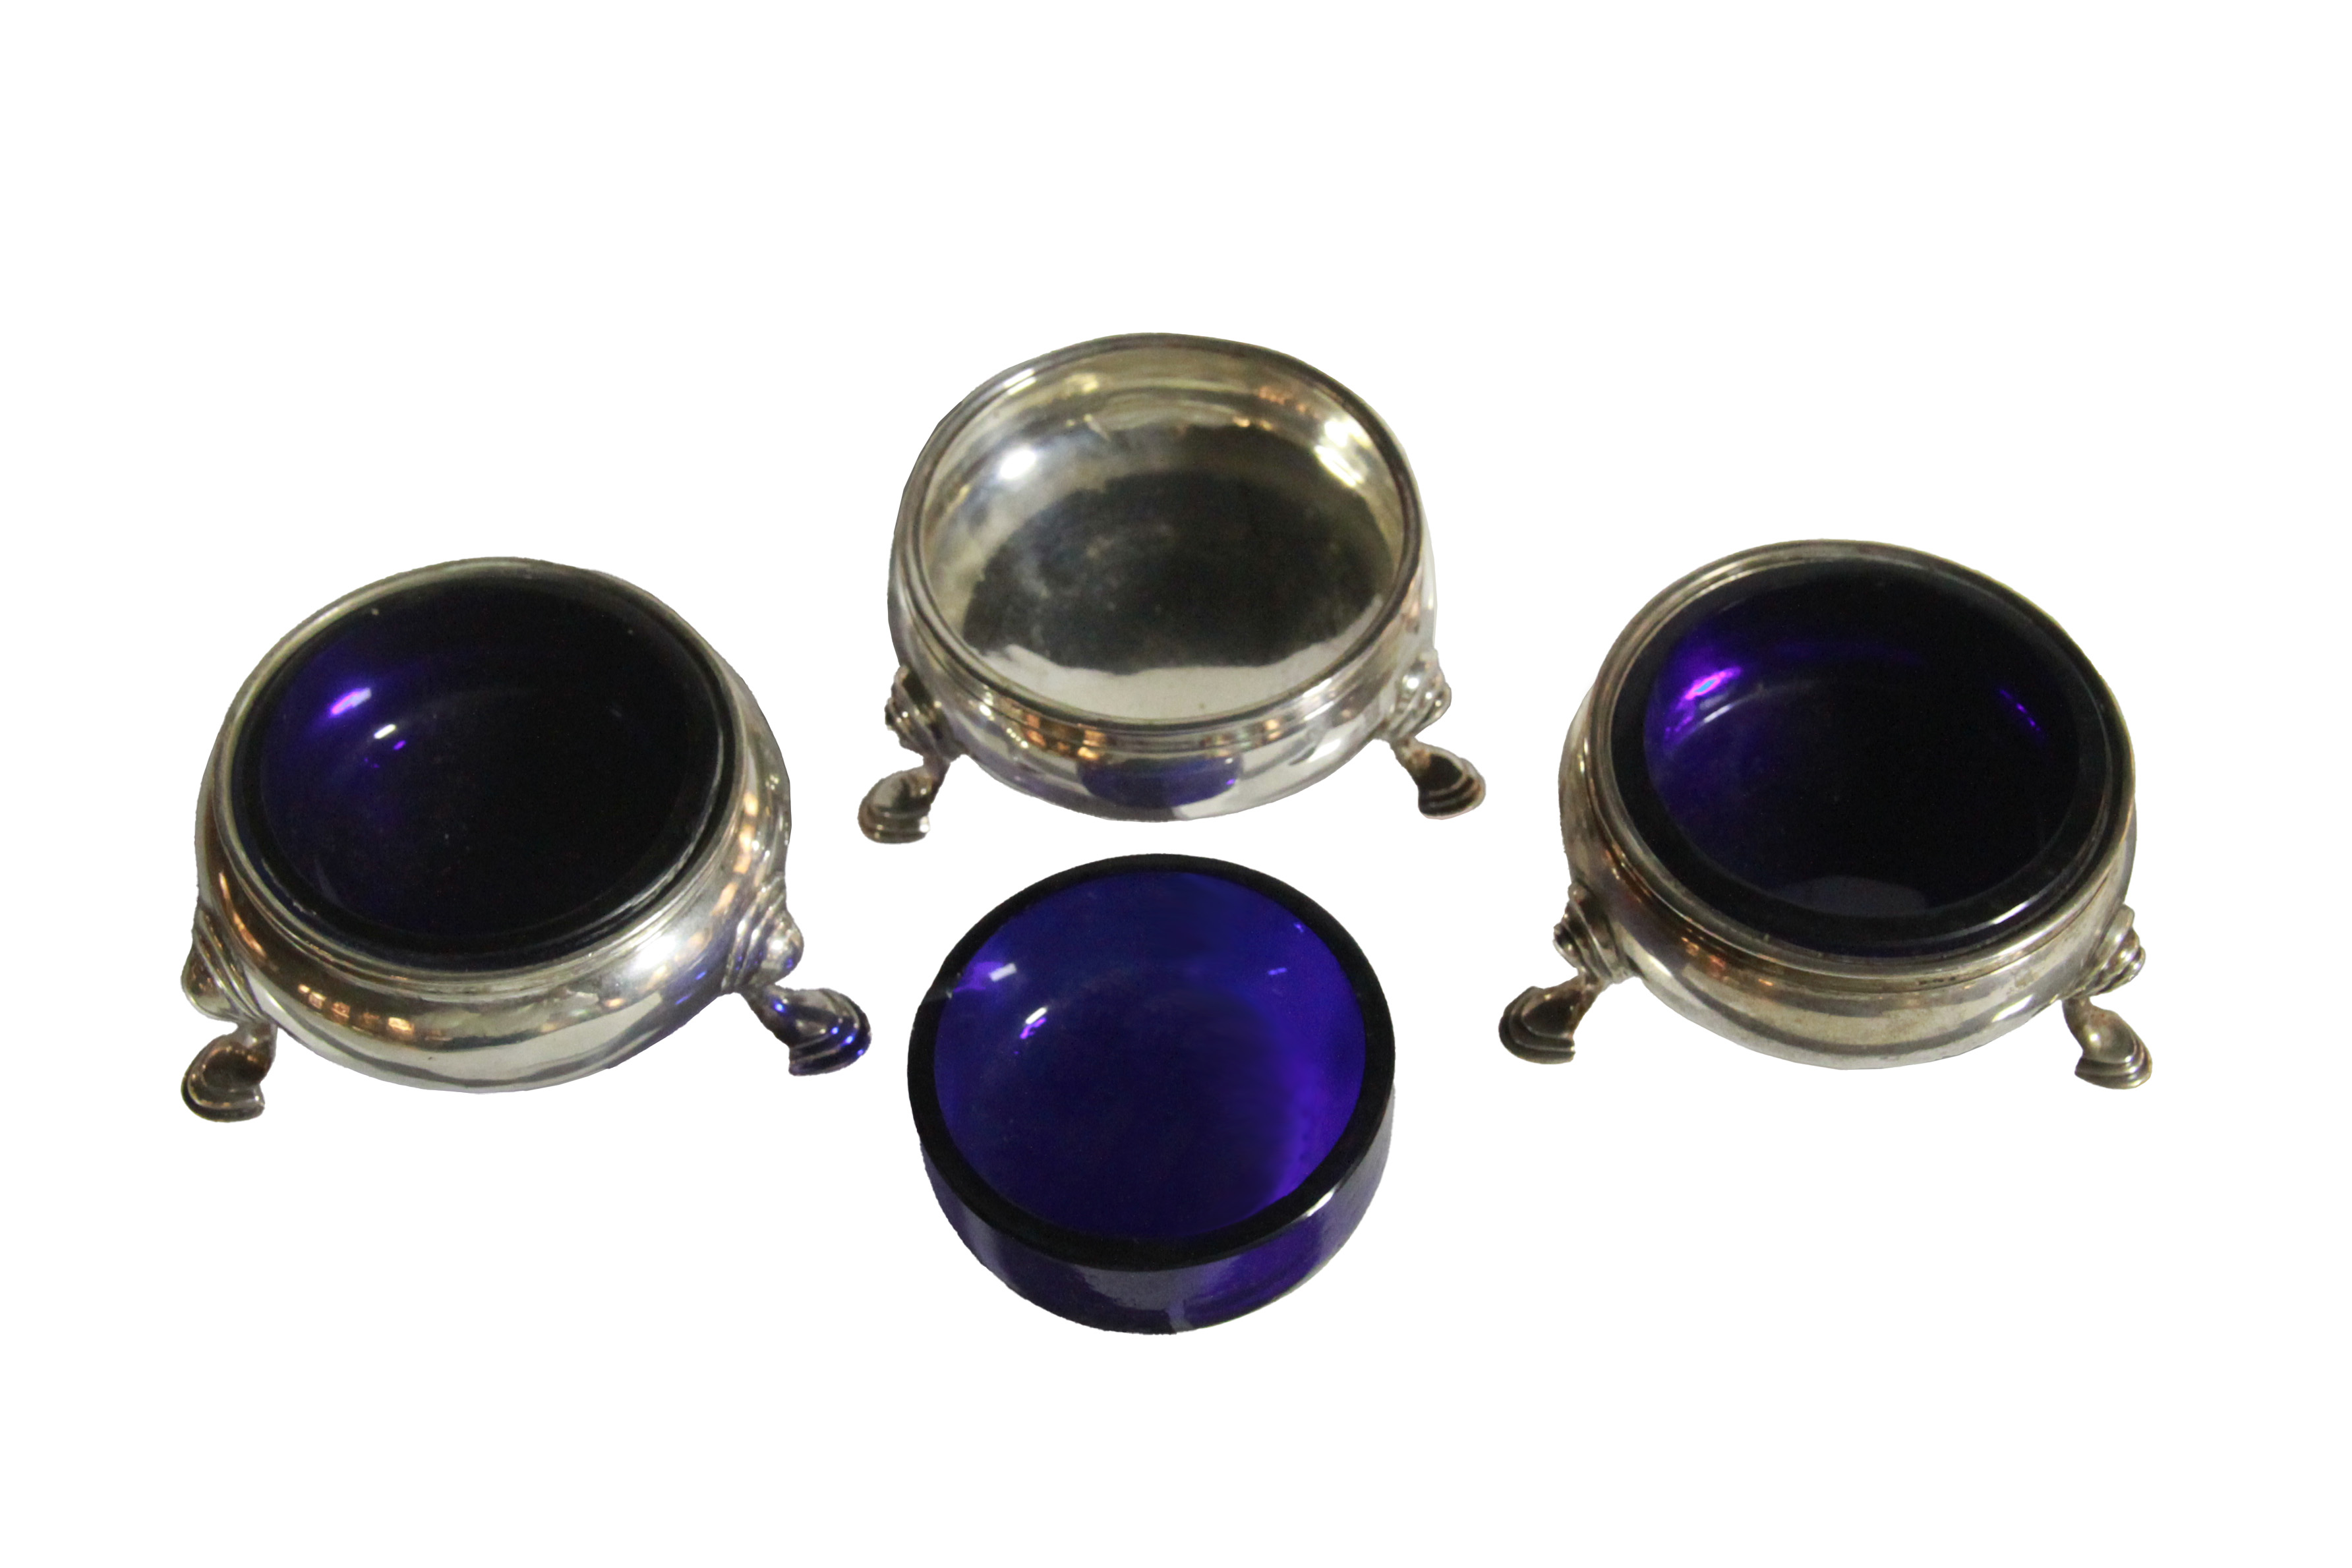 A set of 3 silver salts & liners, Thomas Street in London, 1808-1809, (2.9 oz) - Image 3 of 5